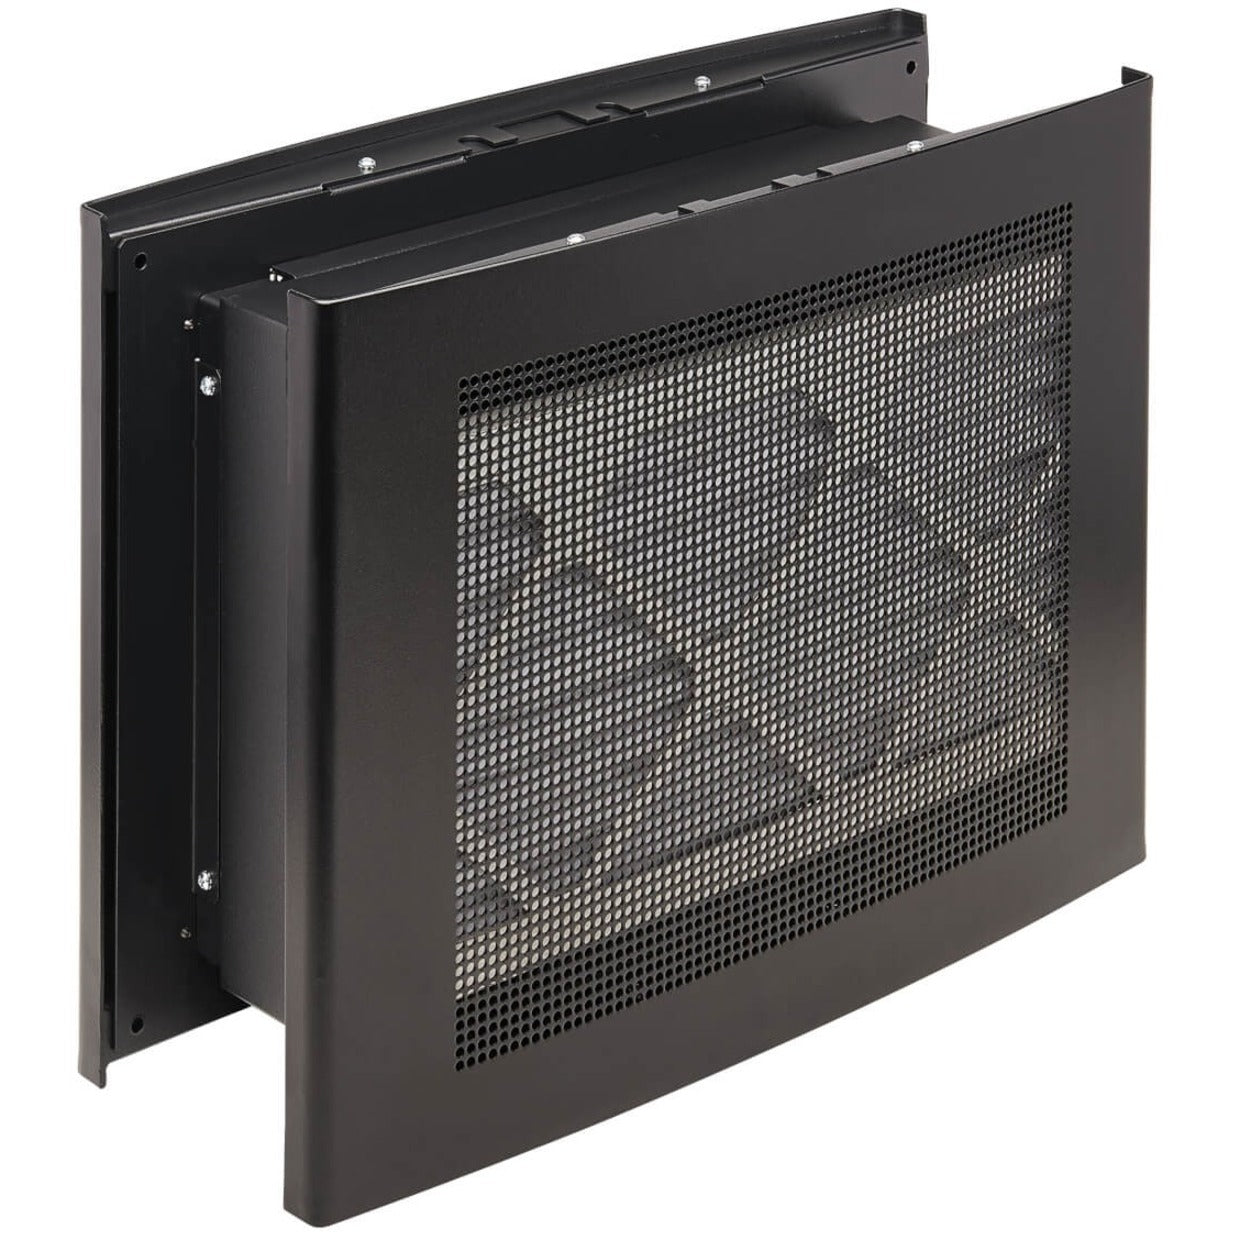 Tripp Lite SRCLOSETINTAKE SmartRack Cooling Duct, Through-Wall Air Duct for Wiring Closet